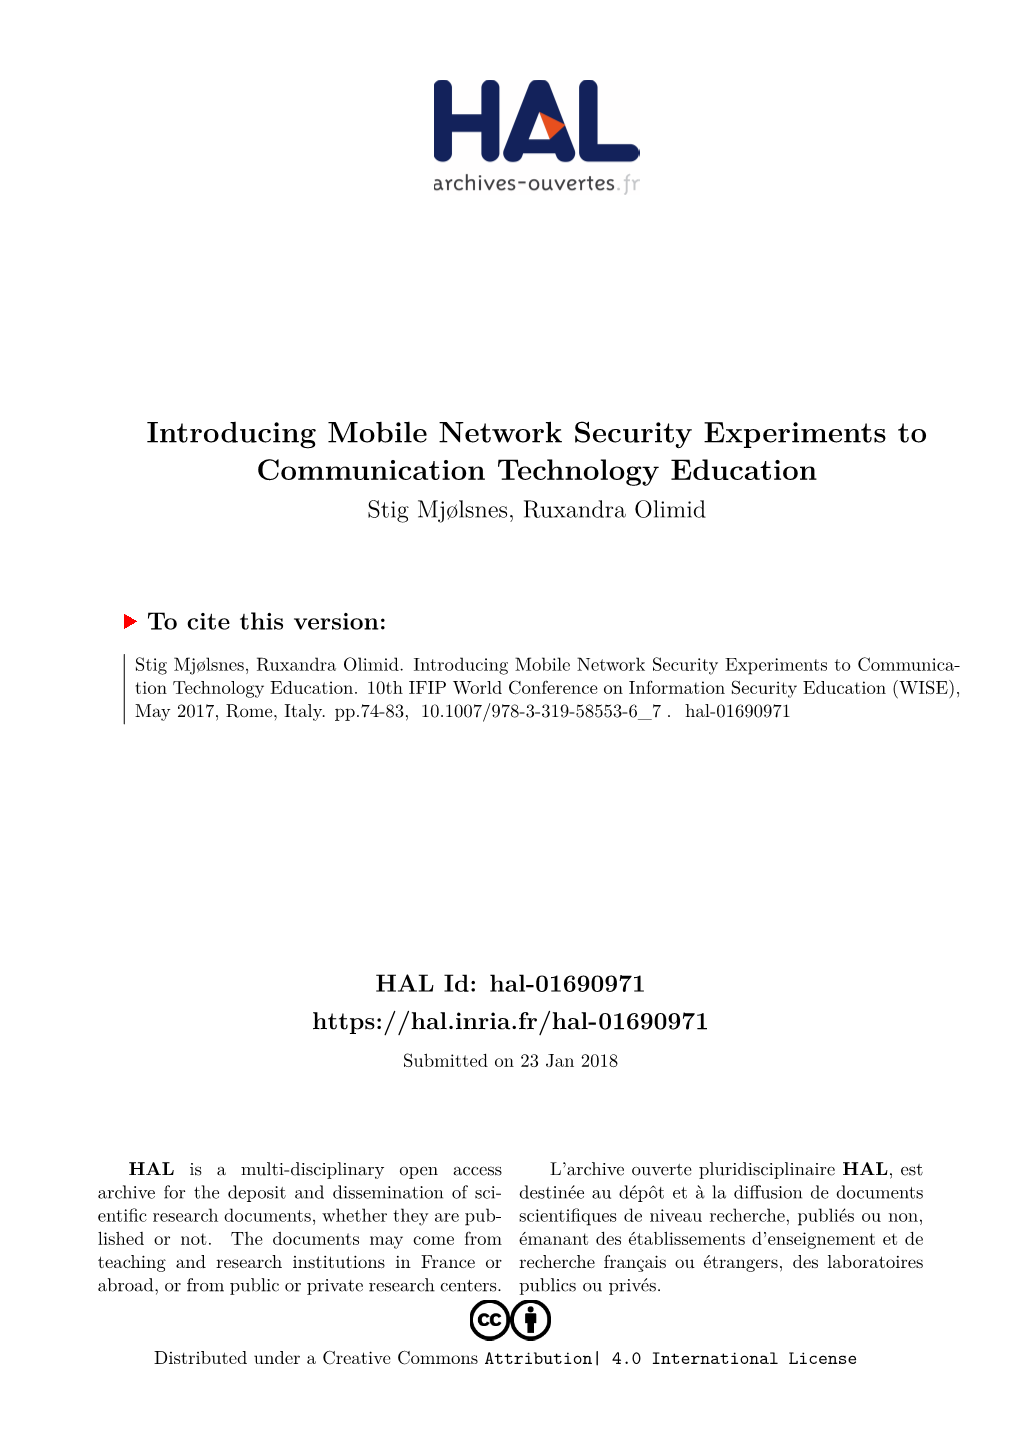 Introducing Mobile Network Security Experiments to Communication Technology Education Stig Mjølsnes, Ruxandra Olimid